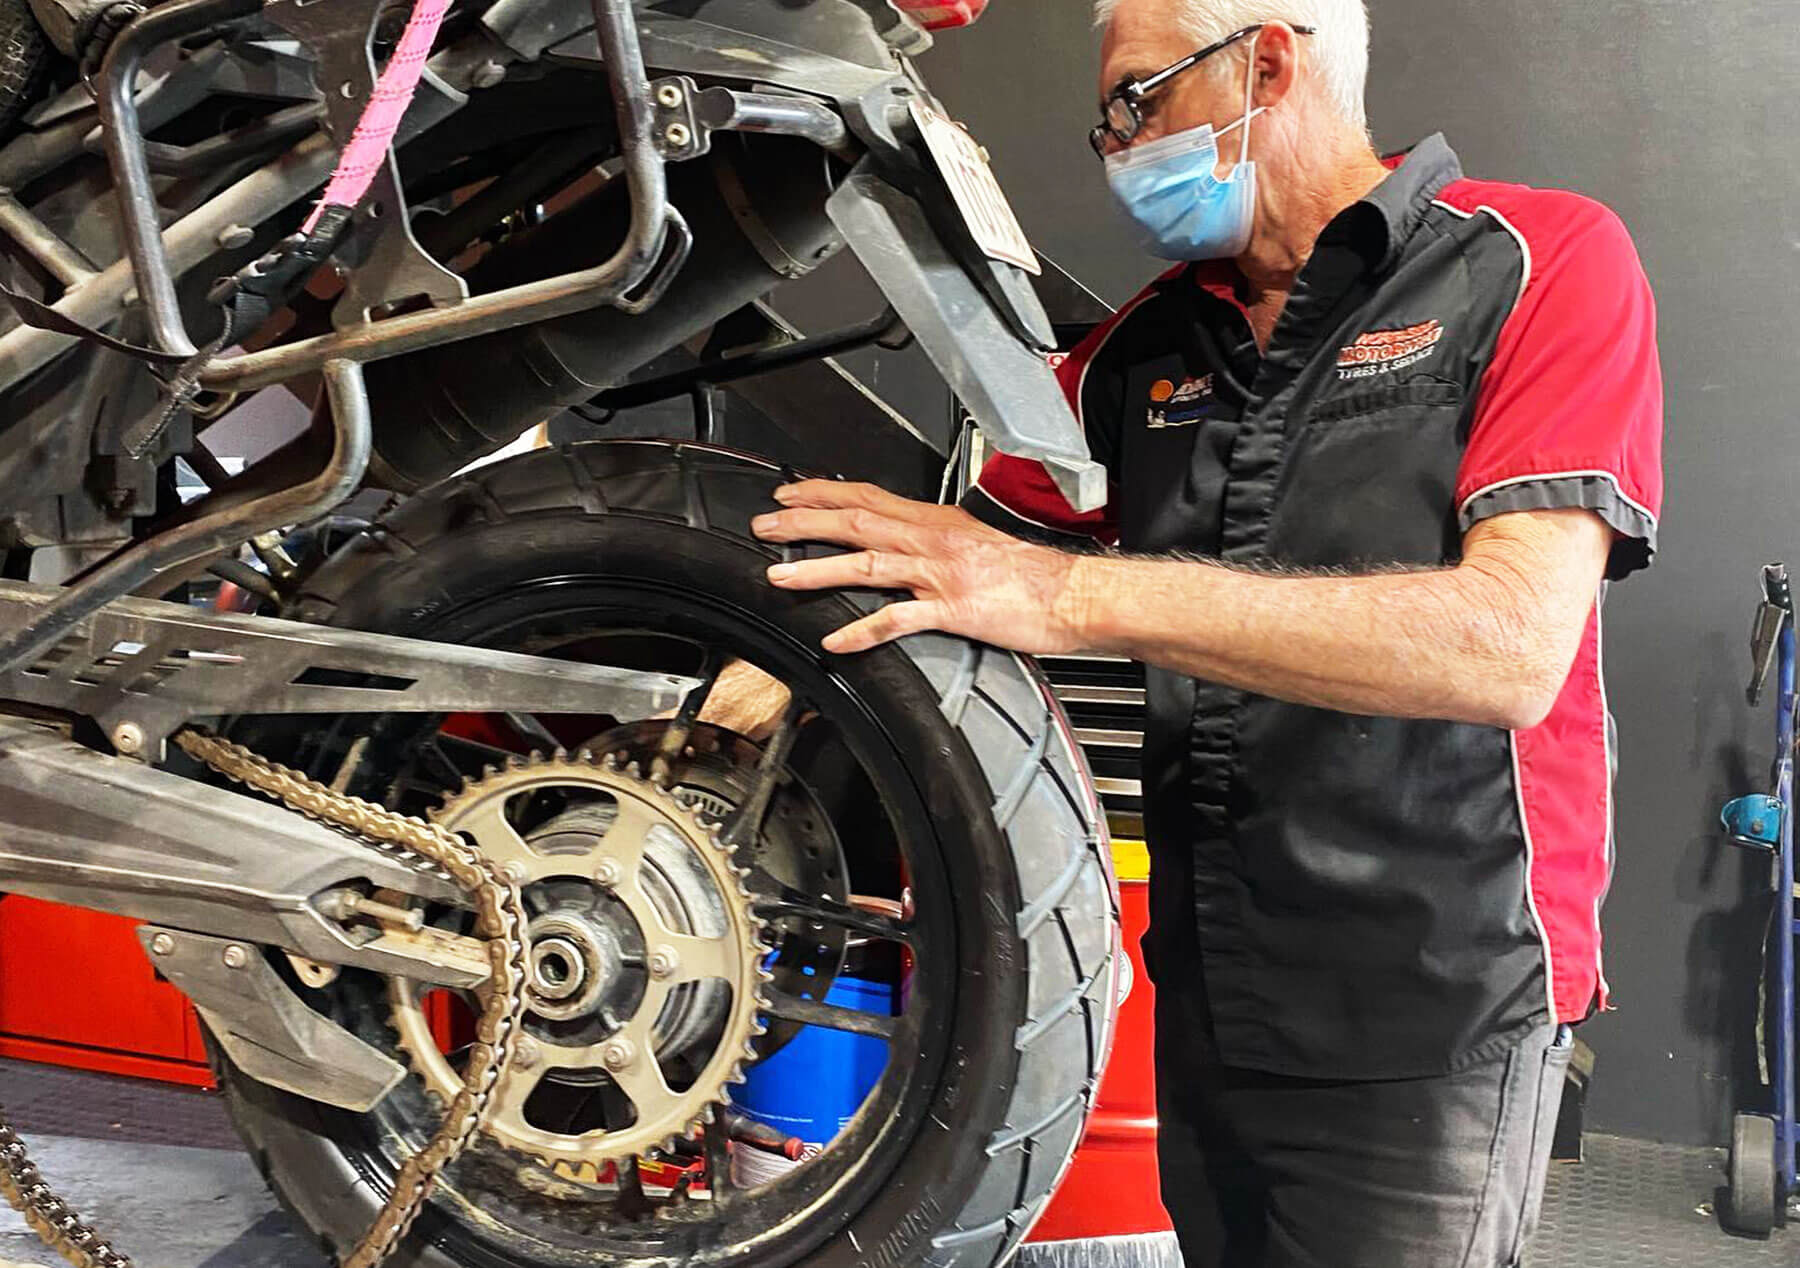 Motorcycle Safety Certificate Brisbane